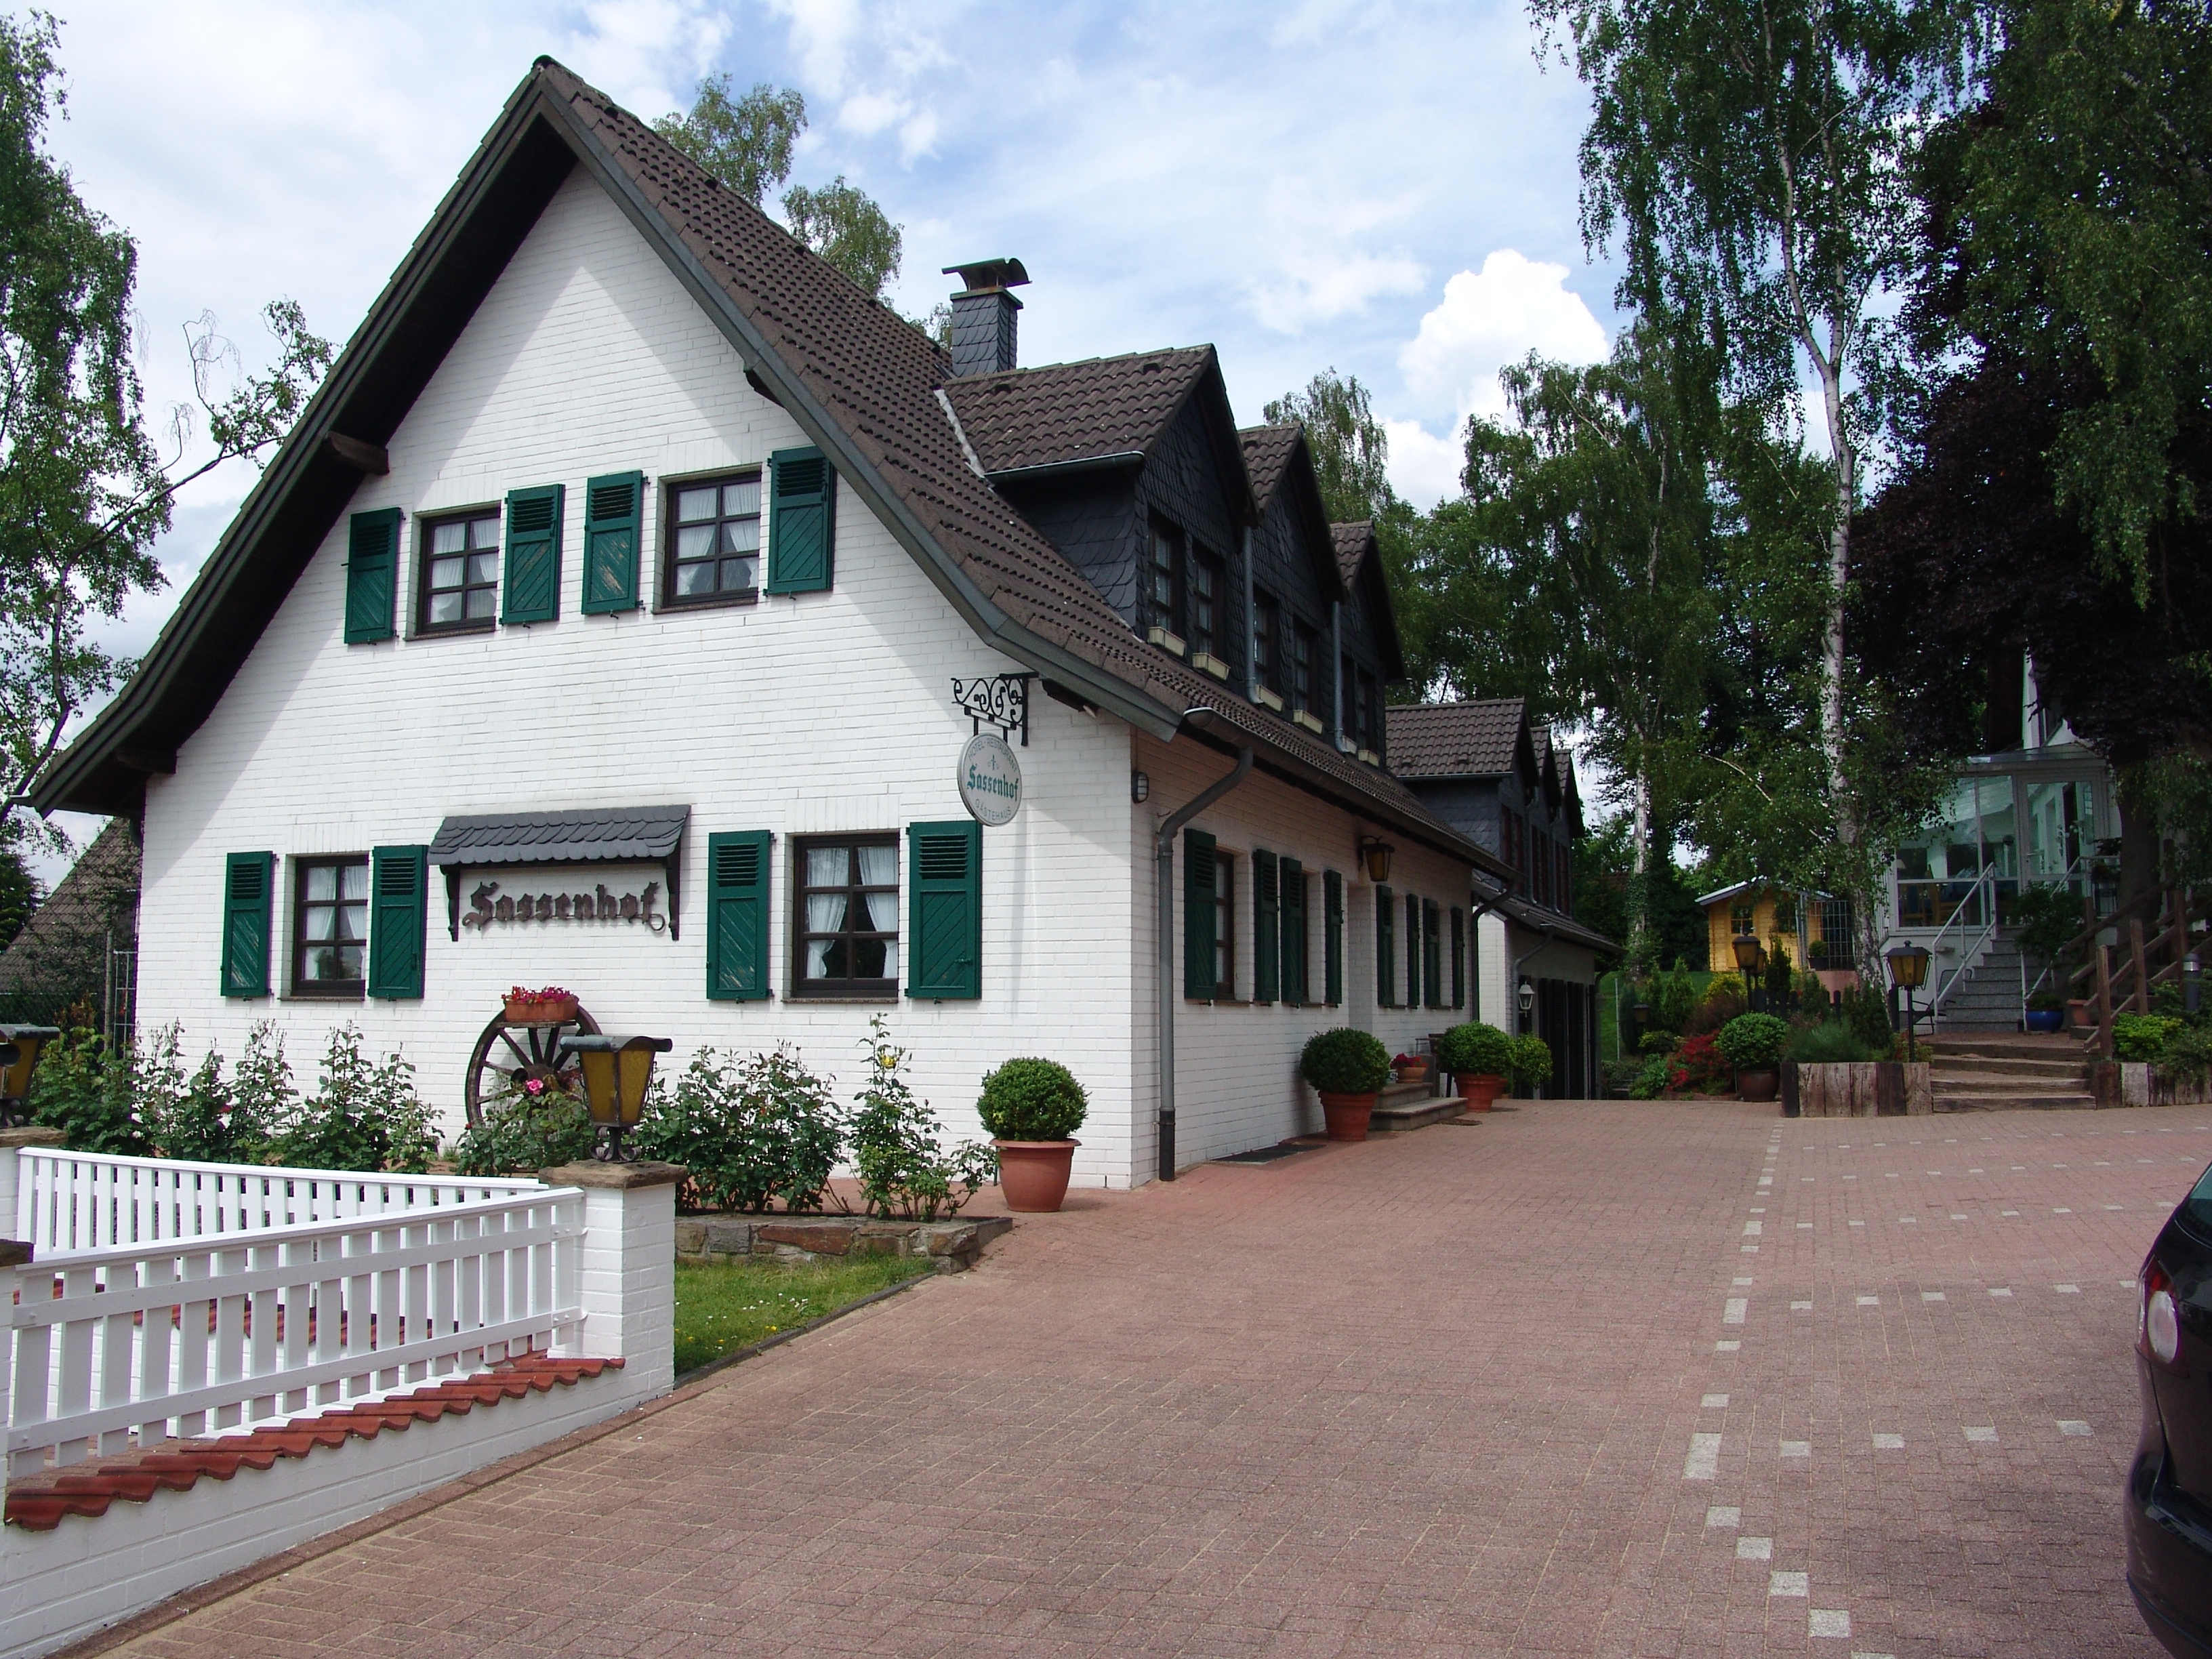 Landhaus Sassenhof <br/>110.00 ew <br/> <a href='http://vakantieoplossing.nl/outpage/?id=7ddc90446e6f9ed07fe353471ca44622' target='_blank'>View Details</a>